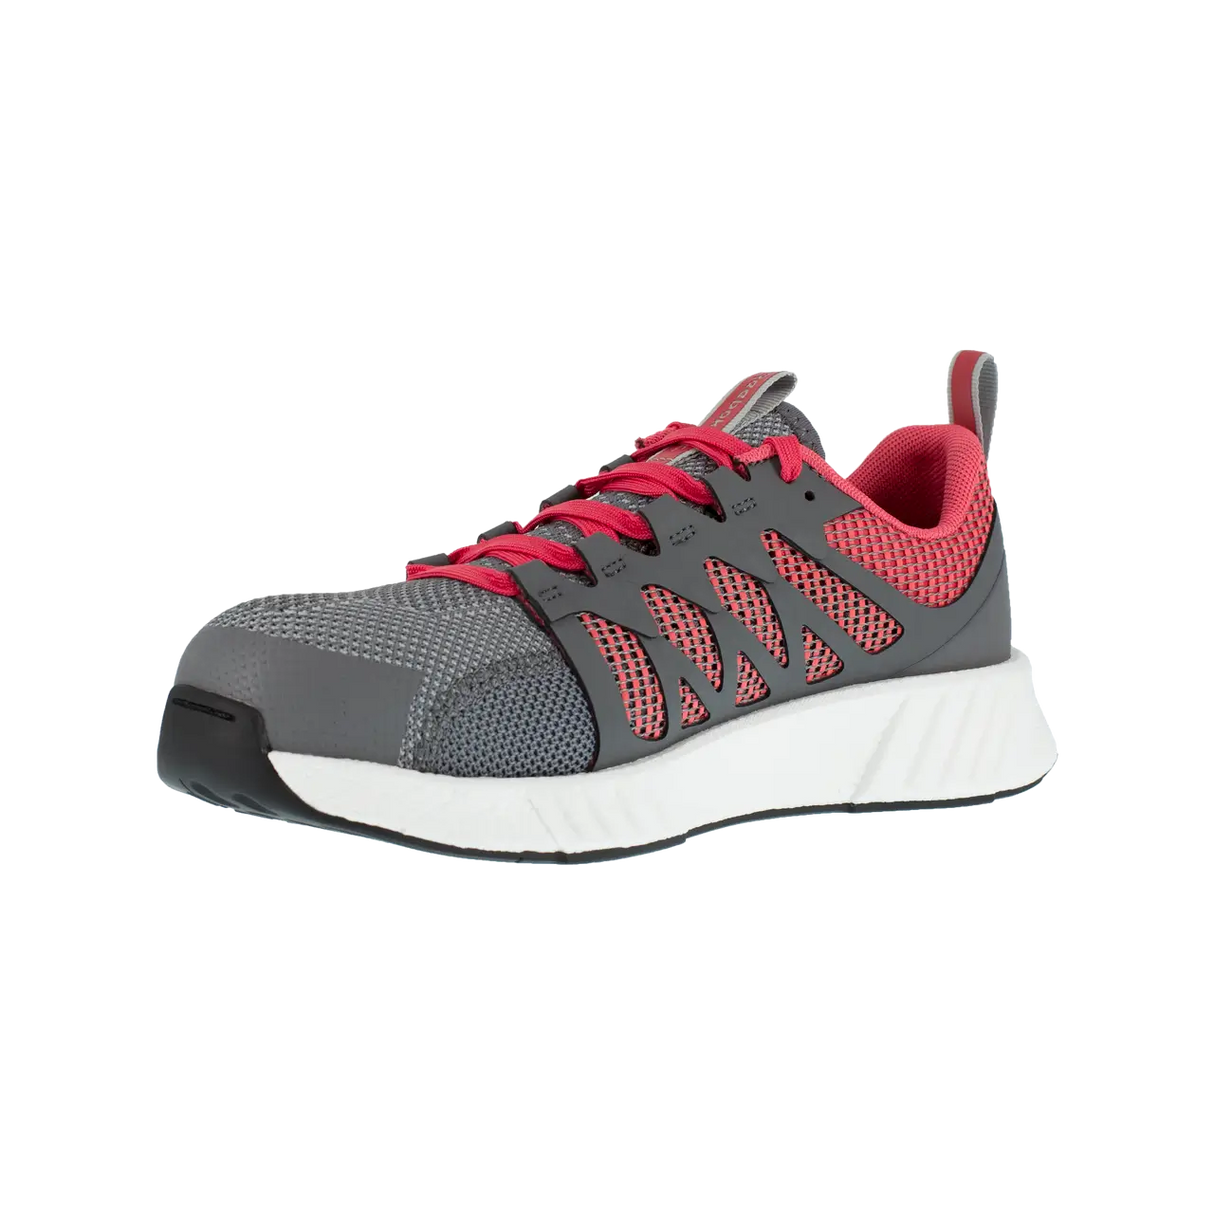 Reebok Women's Fusion Flexweave Comp Toe Grey And Pink RB312 Inside View